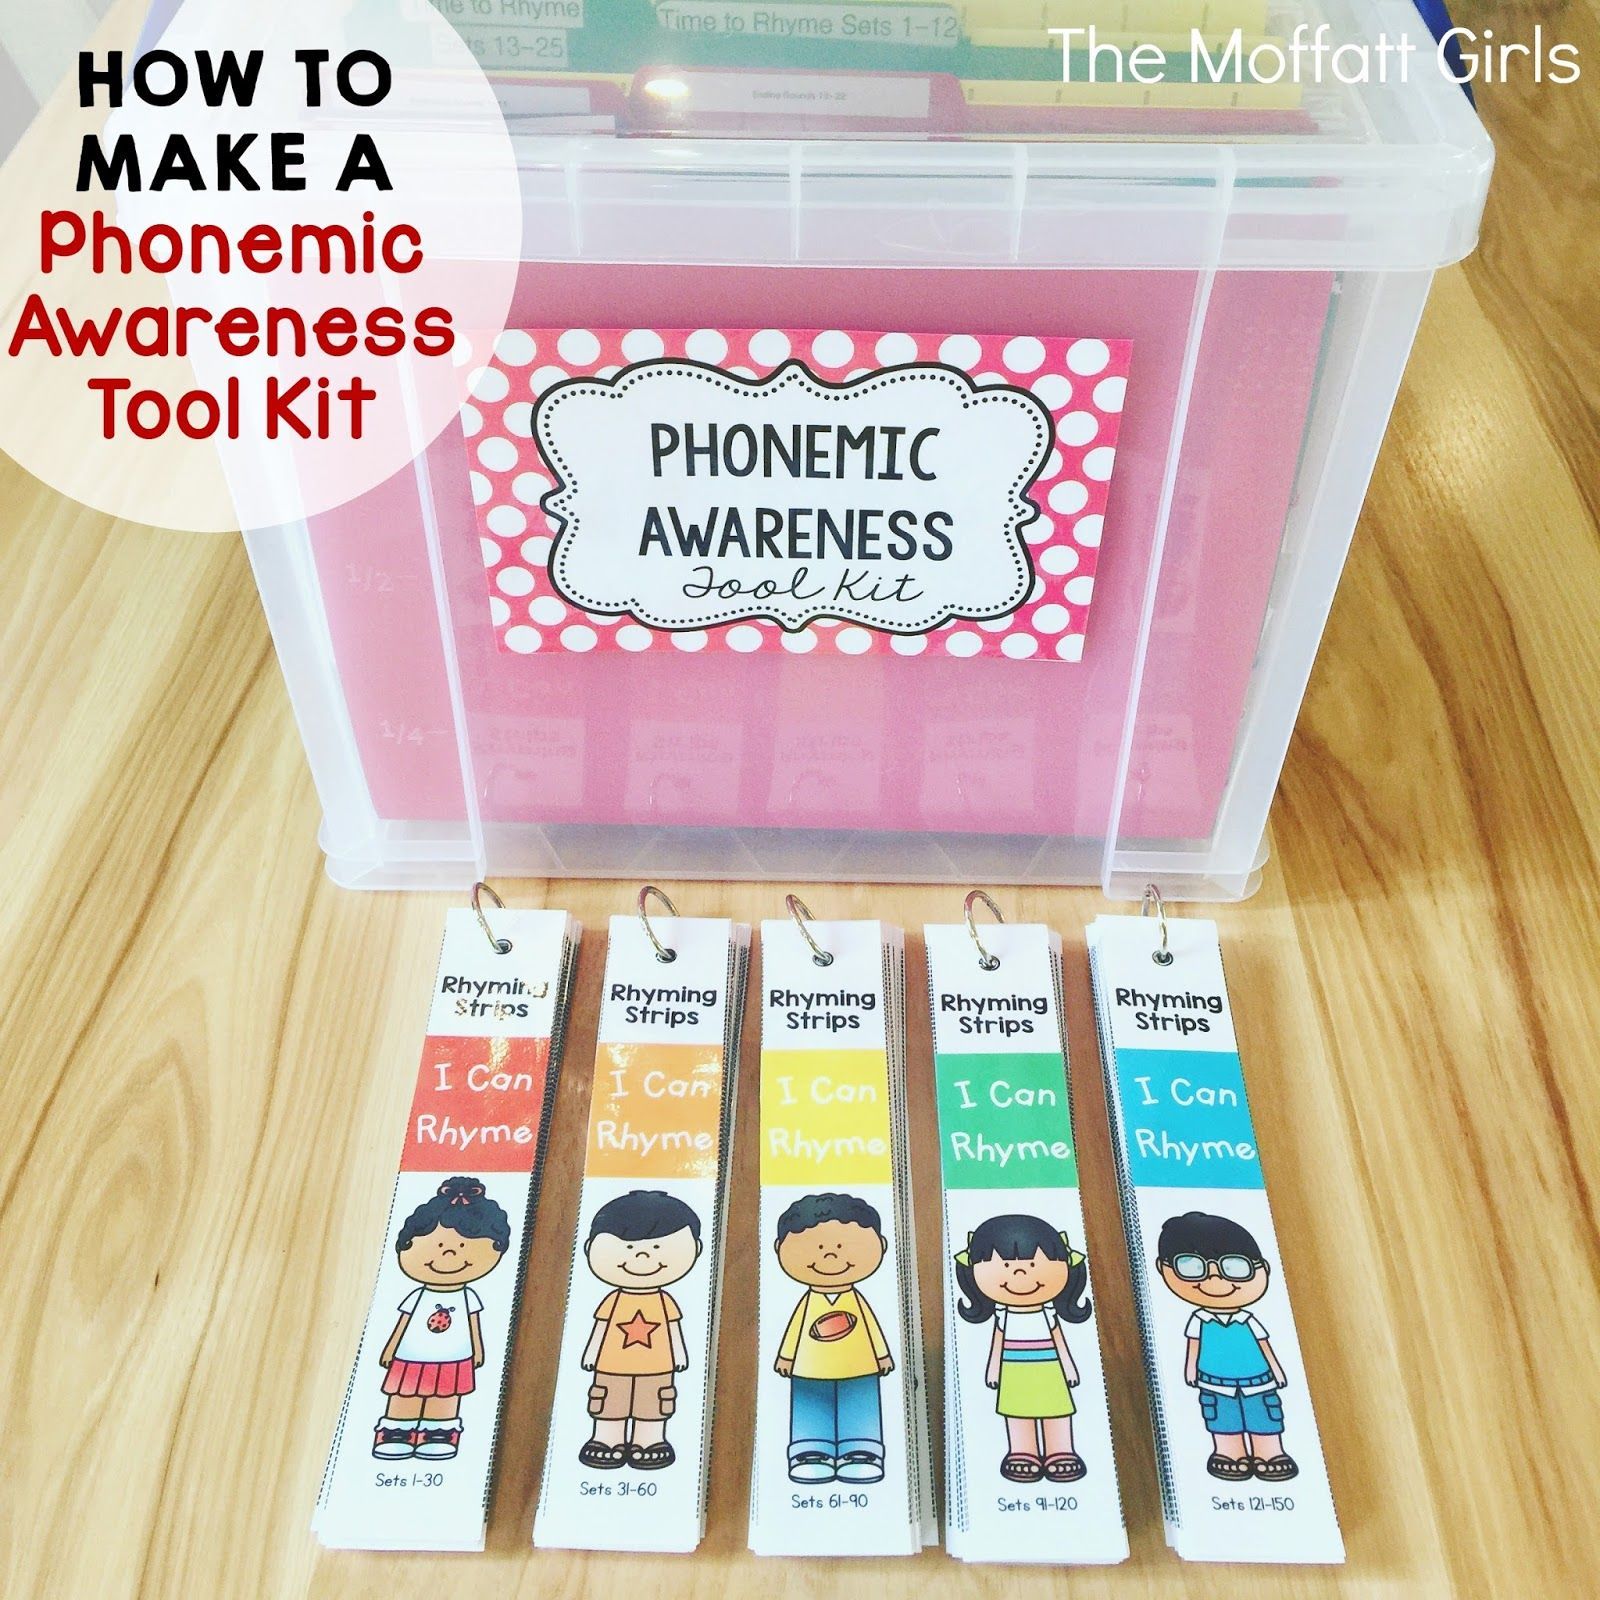 How to Make a Phonemic Awareness Tool Kit. Keeping materials organized is key for managing a successfu